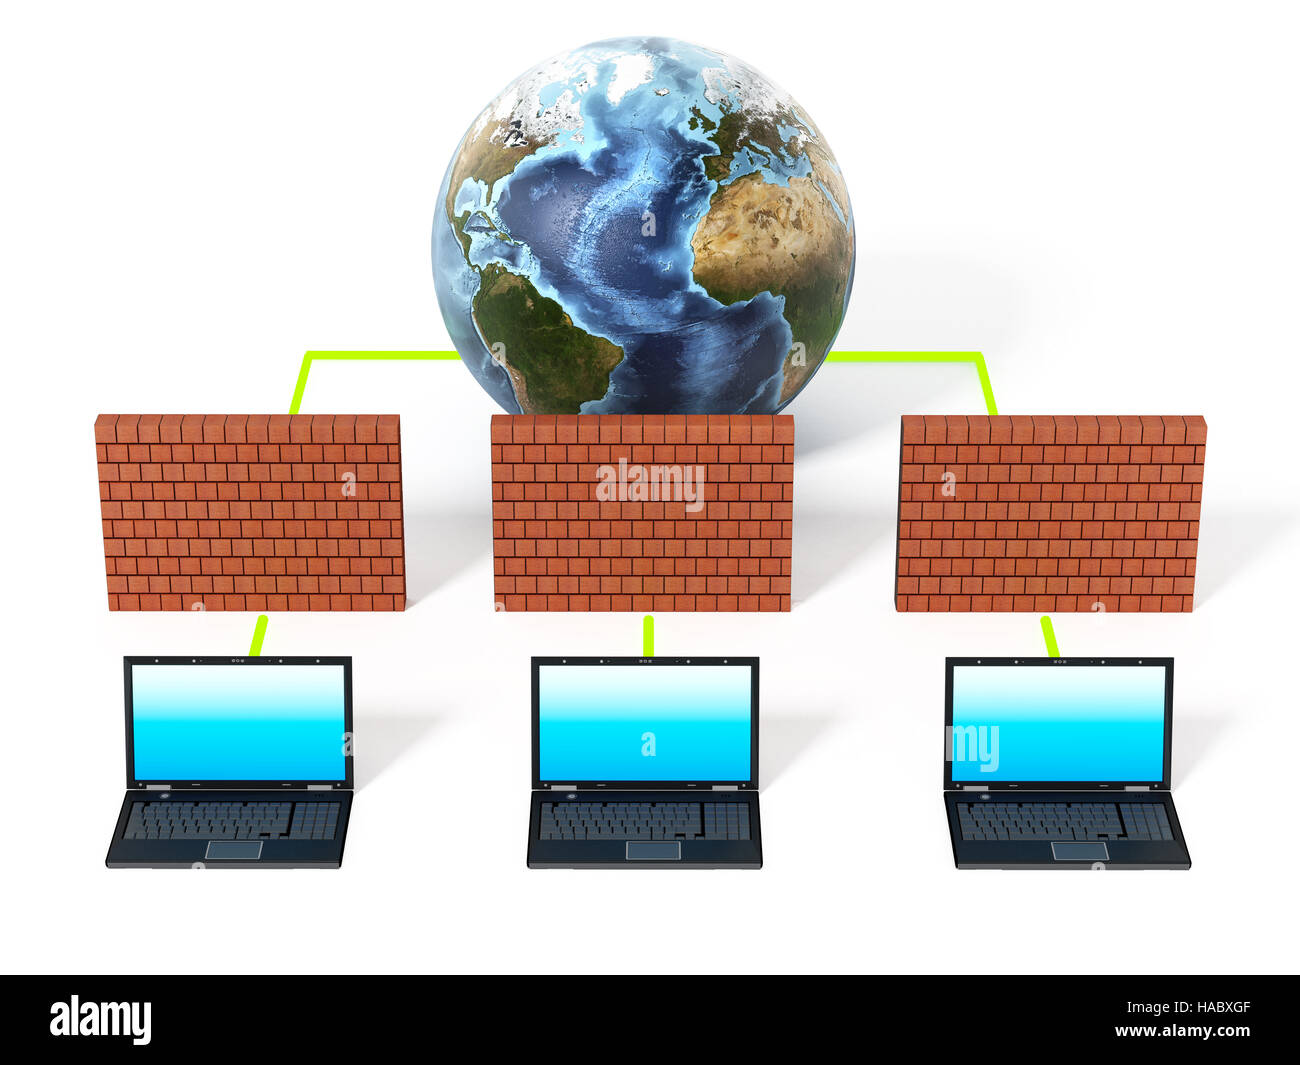 Laptop computers protected by firewall. 3D illustration. Stock Photo